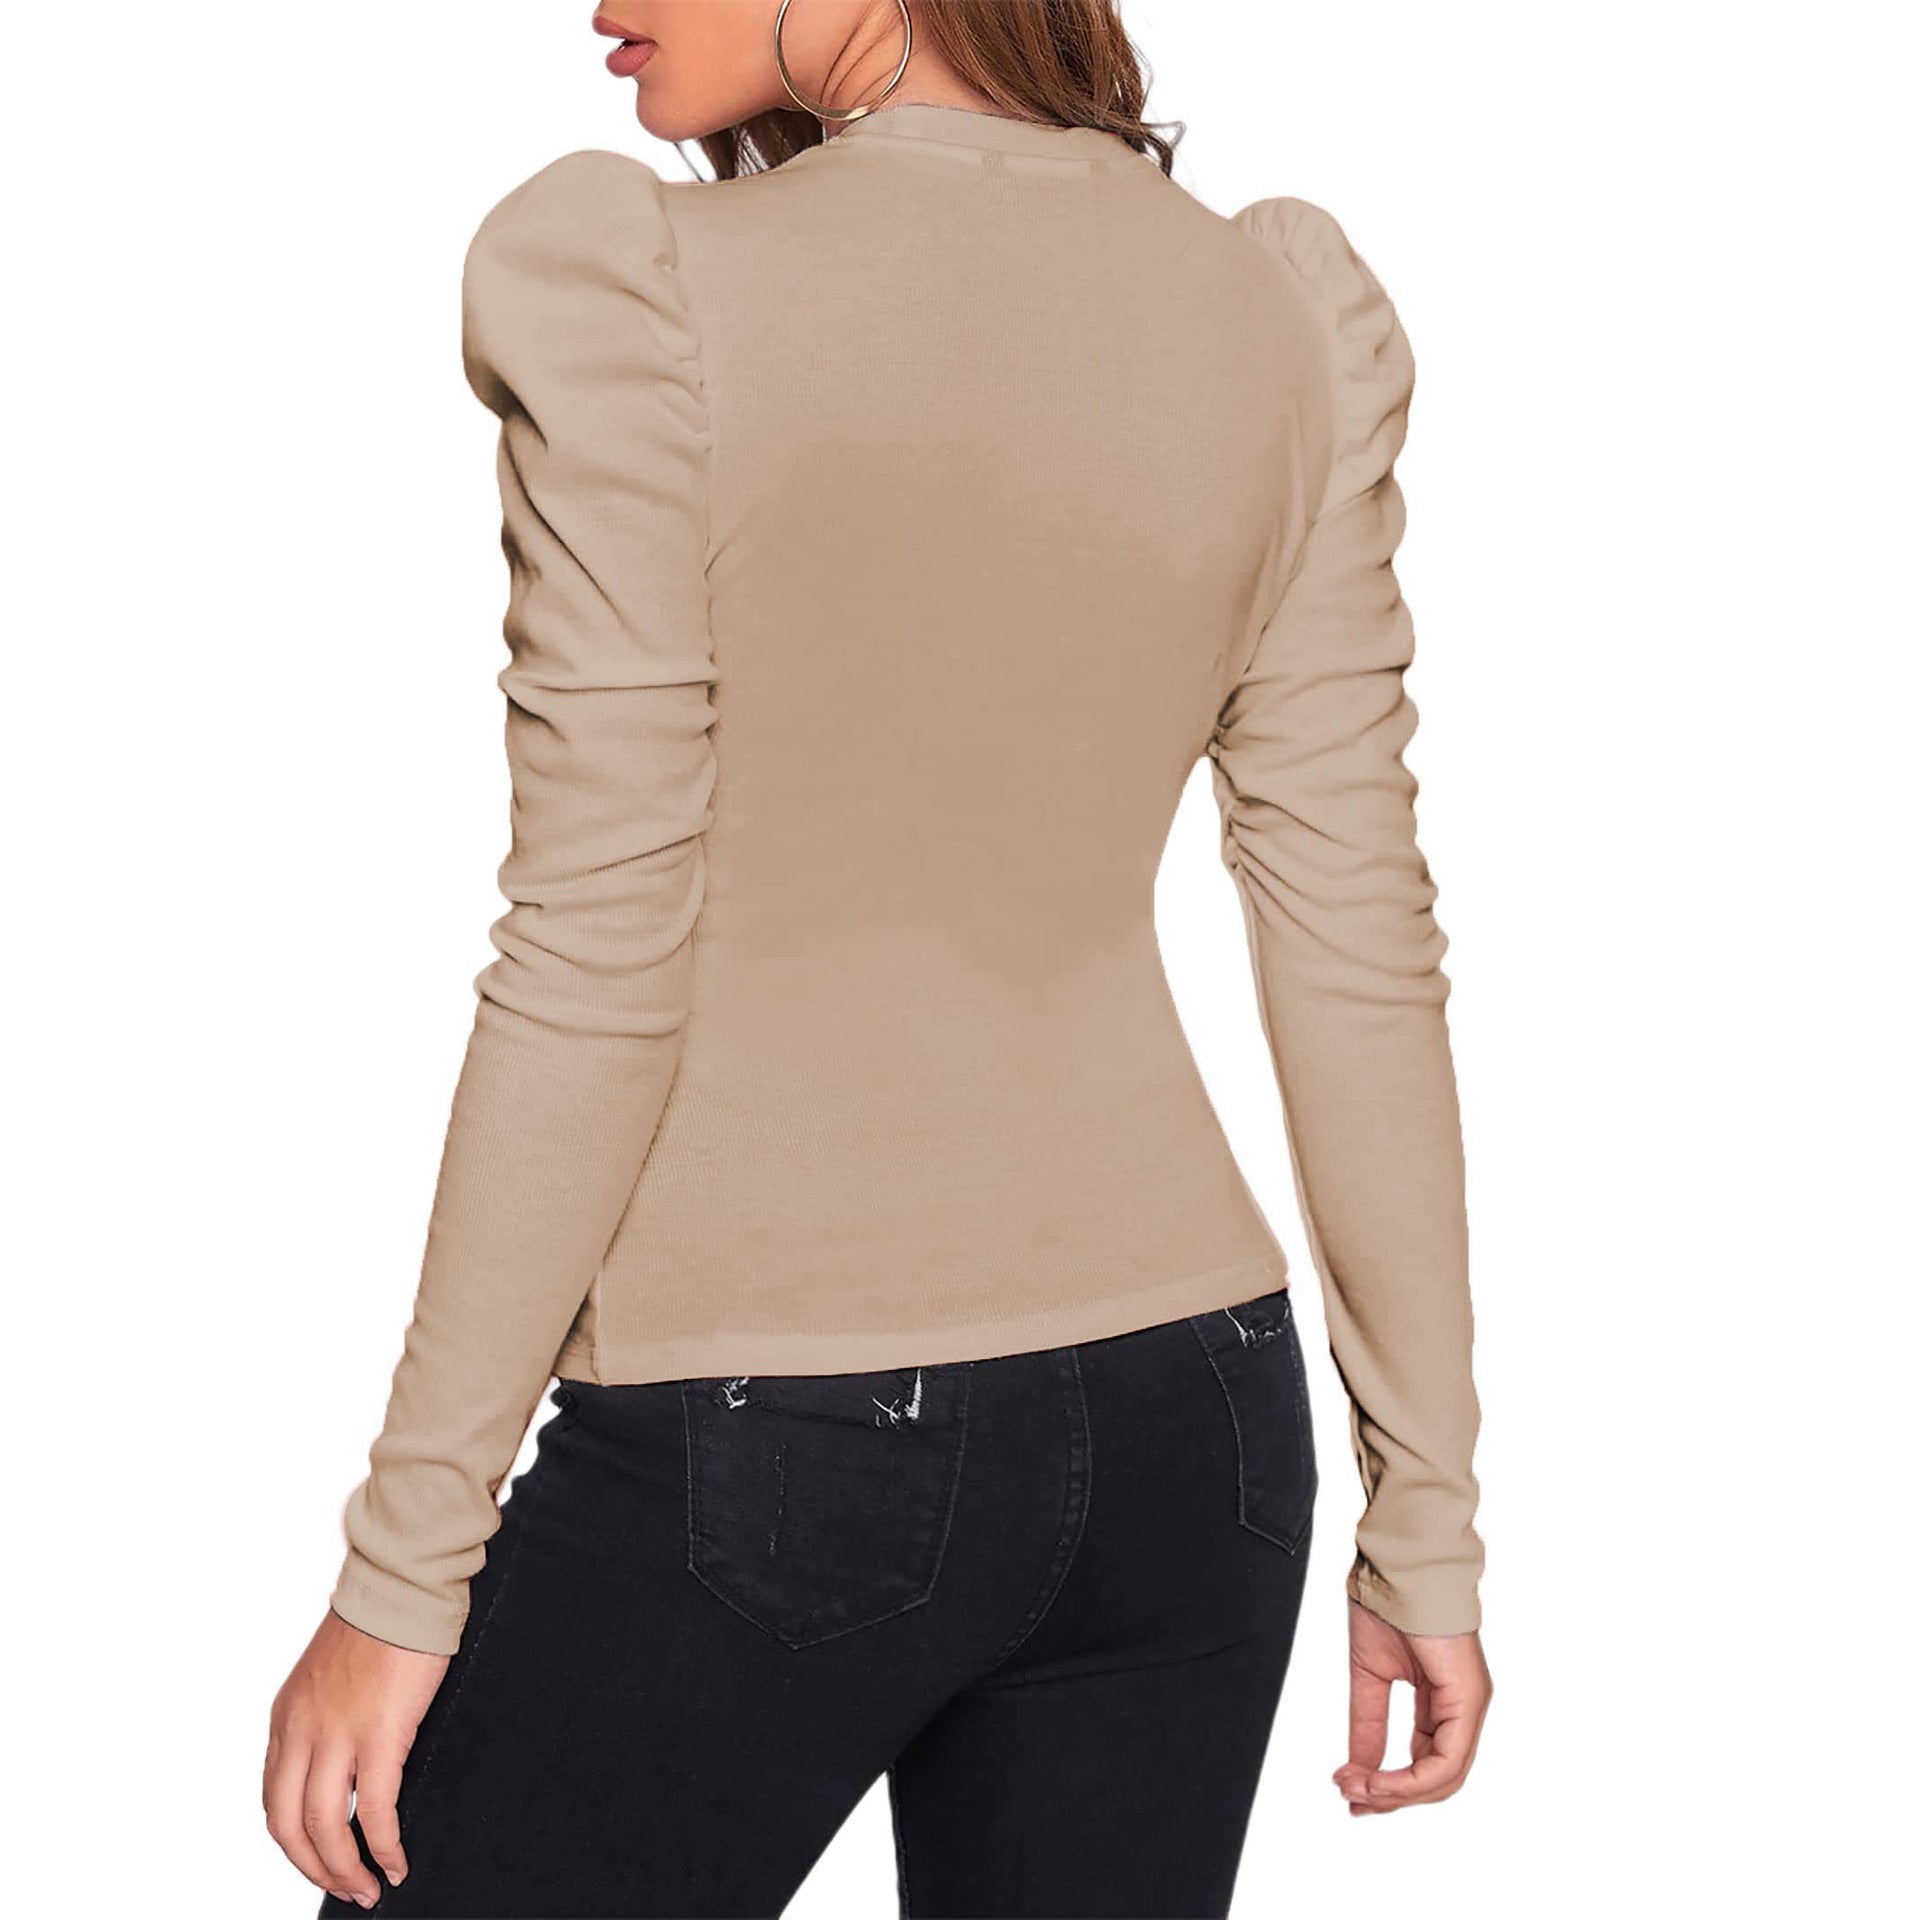 Women Warm T shirt Solid Color round Neck Bubble Long Sleeve Slim Fit Top